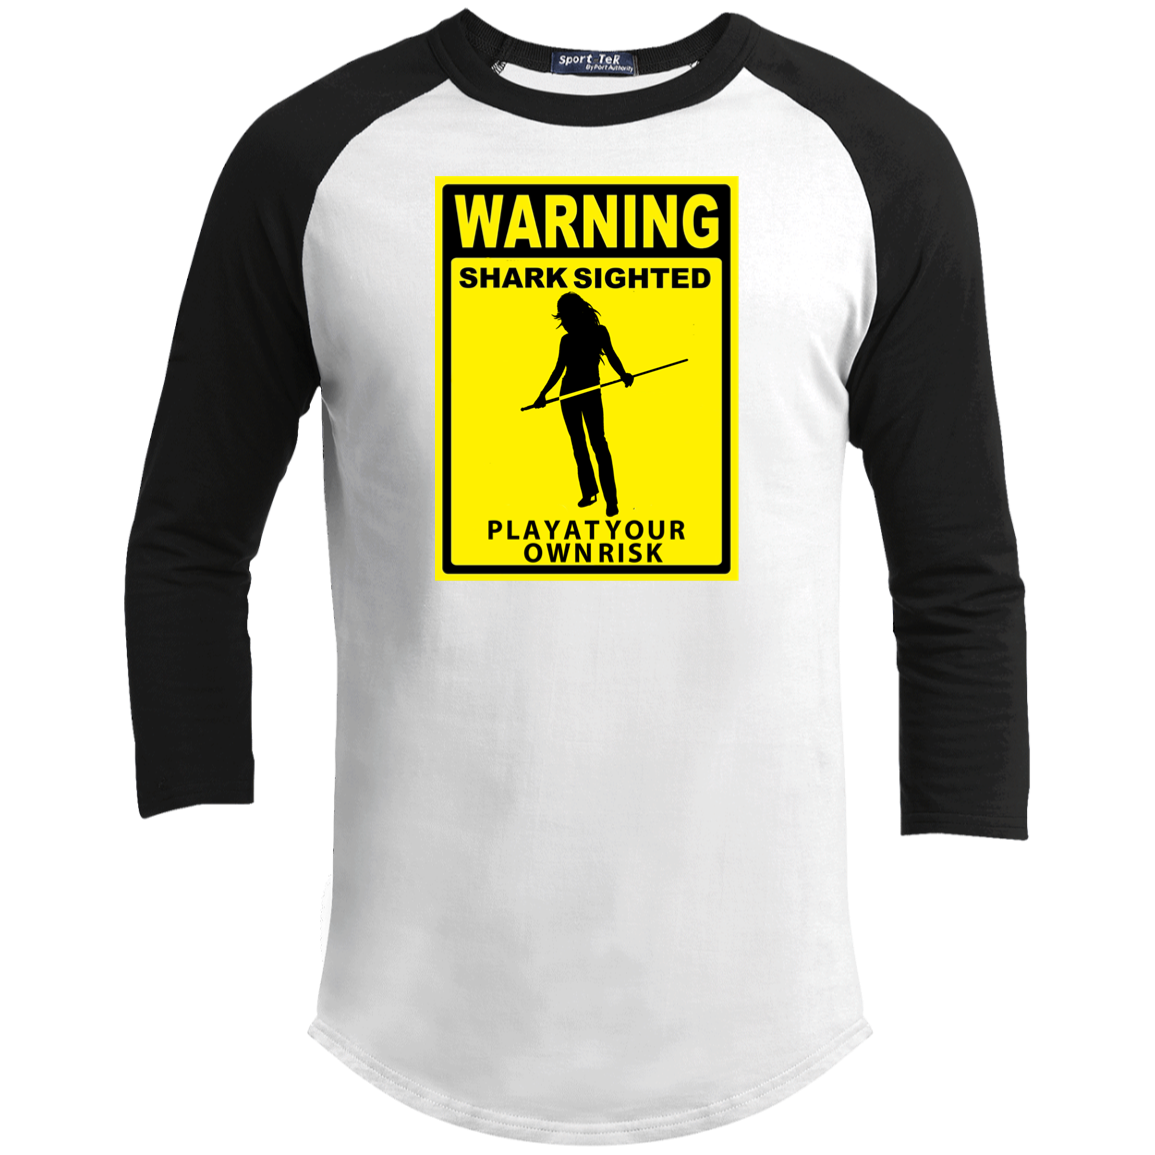 The GHOATS Custom Design. #34 Beware of Sharks. Play at Your Own Risk. (Ladies only version). Youth 3/4 Raglan Sleeve Shirt